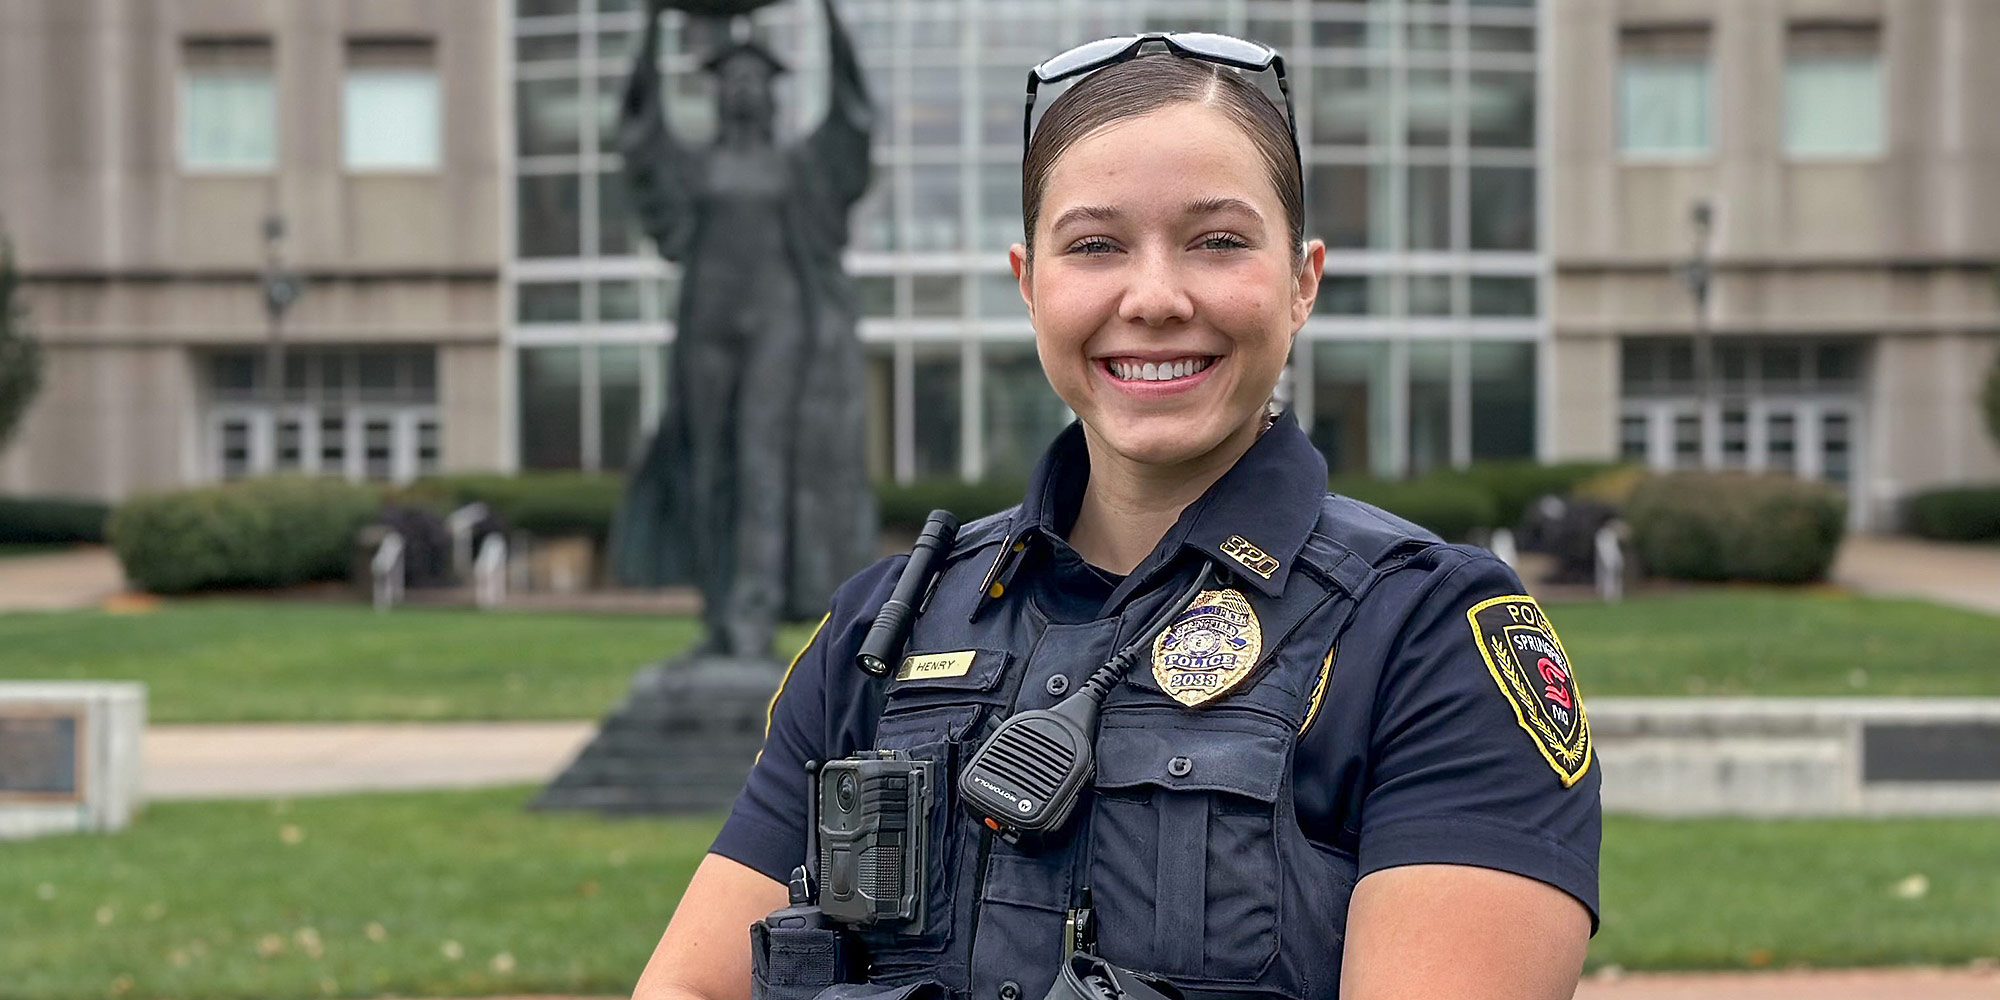 outdoor portrait of female police officer on a university campus